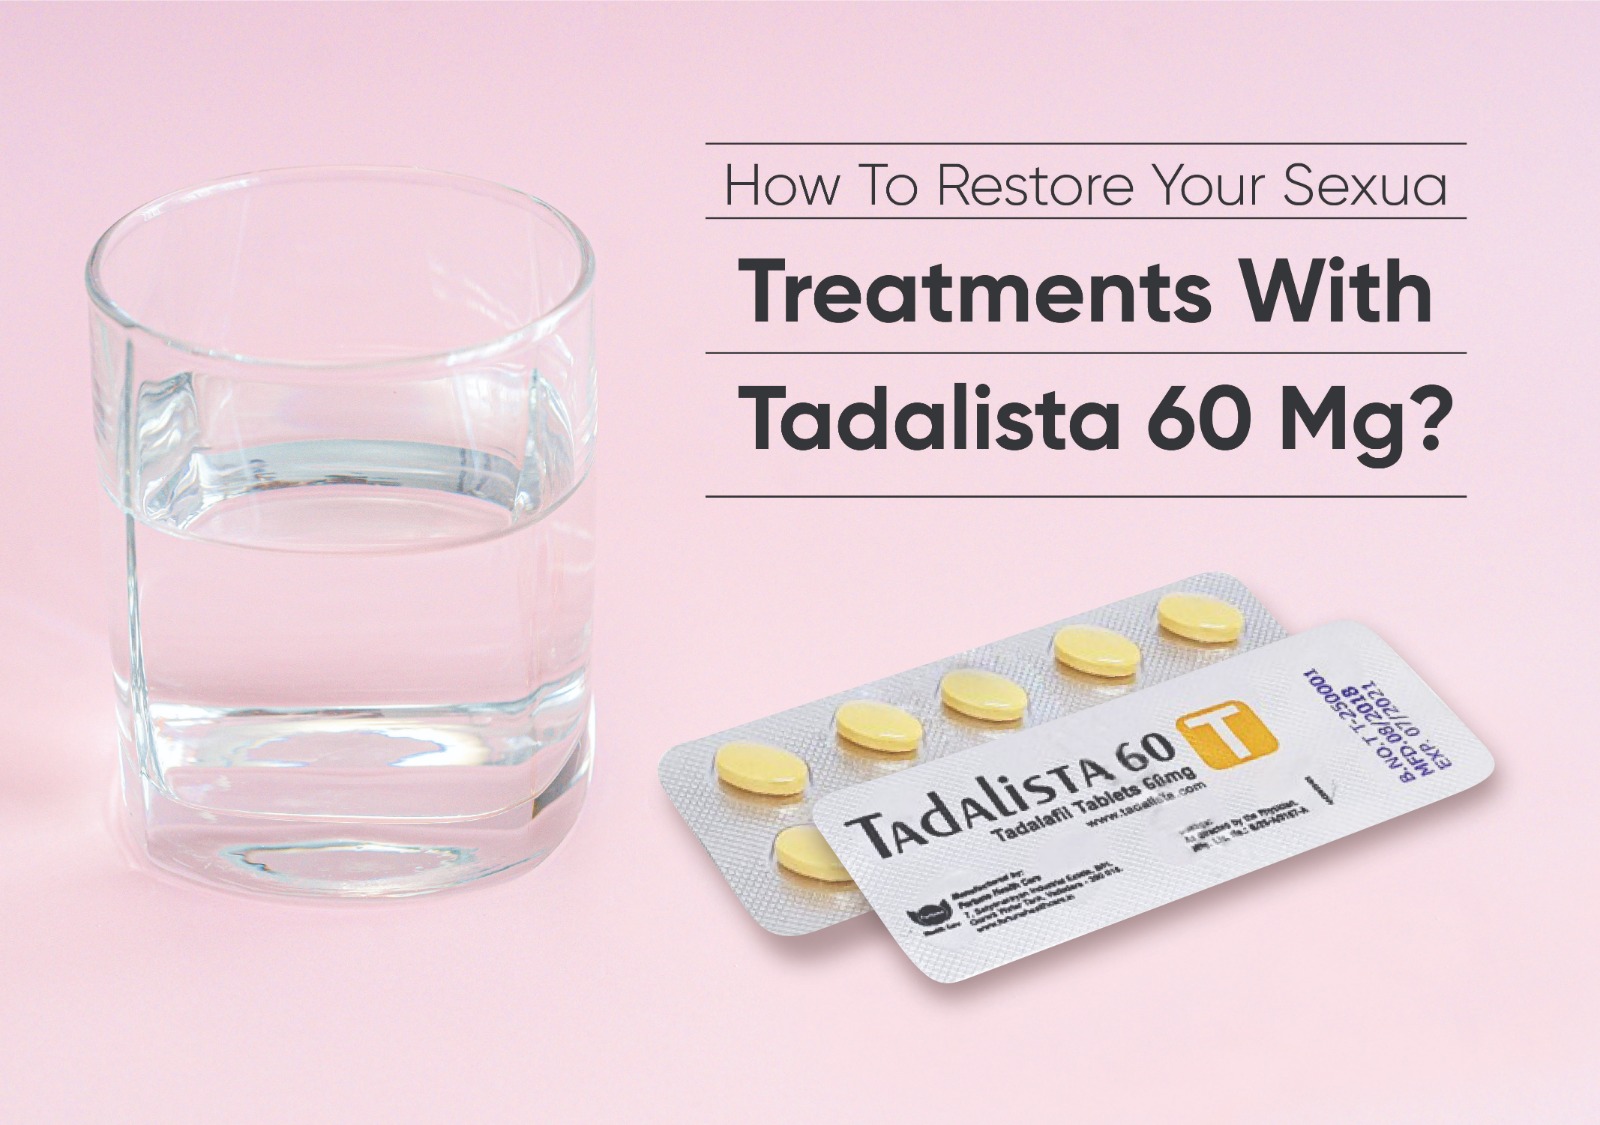 how-to-restore-your-sexual-treatments-with-tadalista-60-mg?